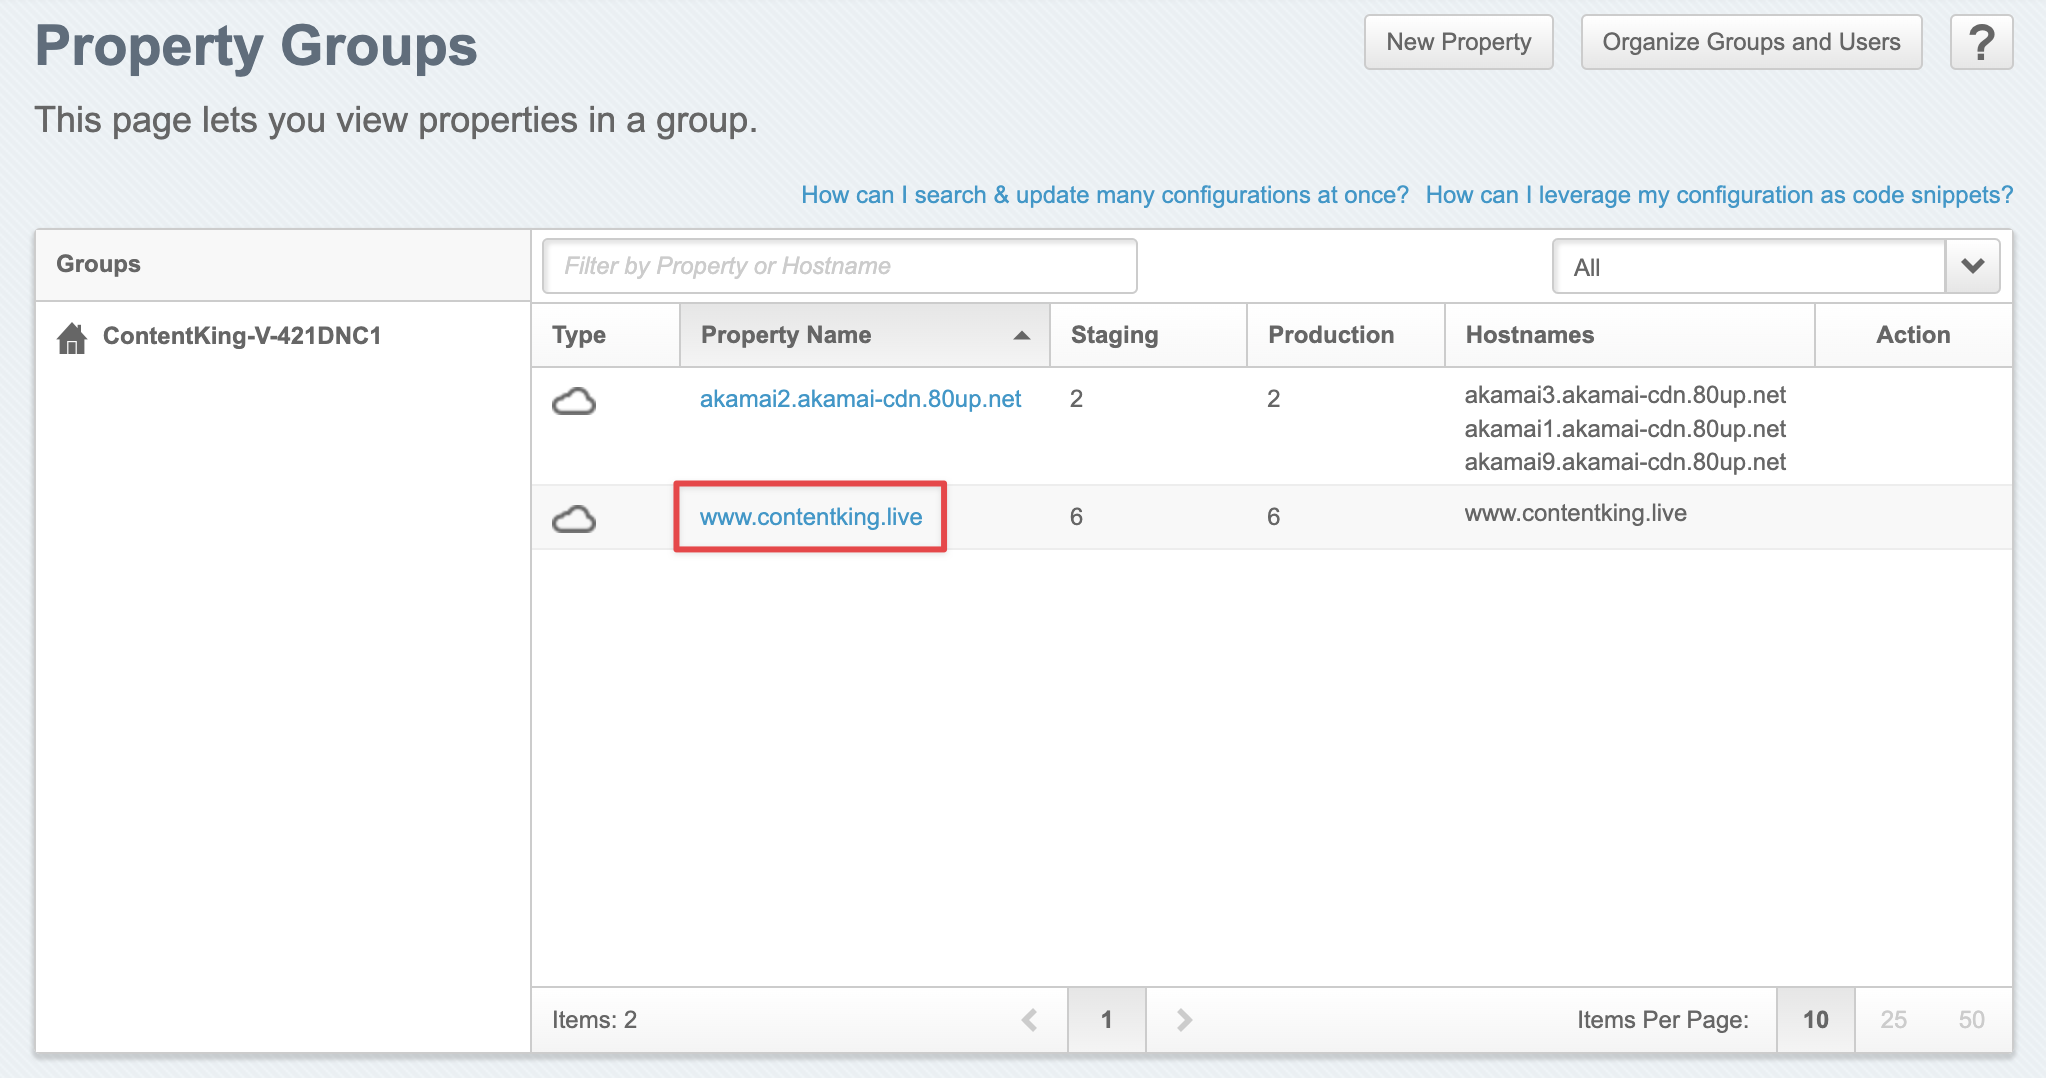 Screenshot of the Property Groups section in the Akamai UI